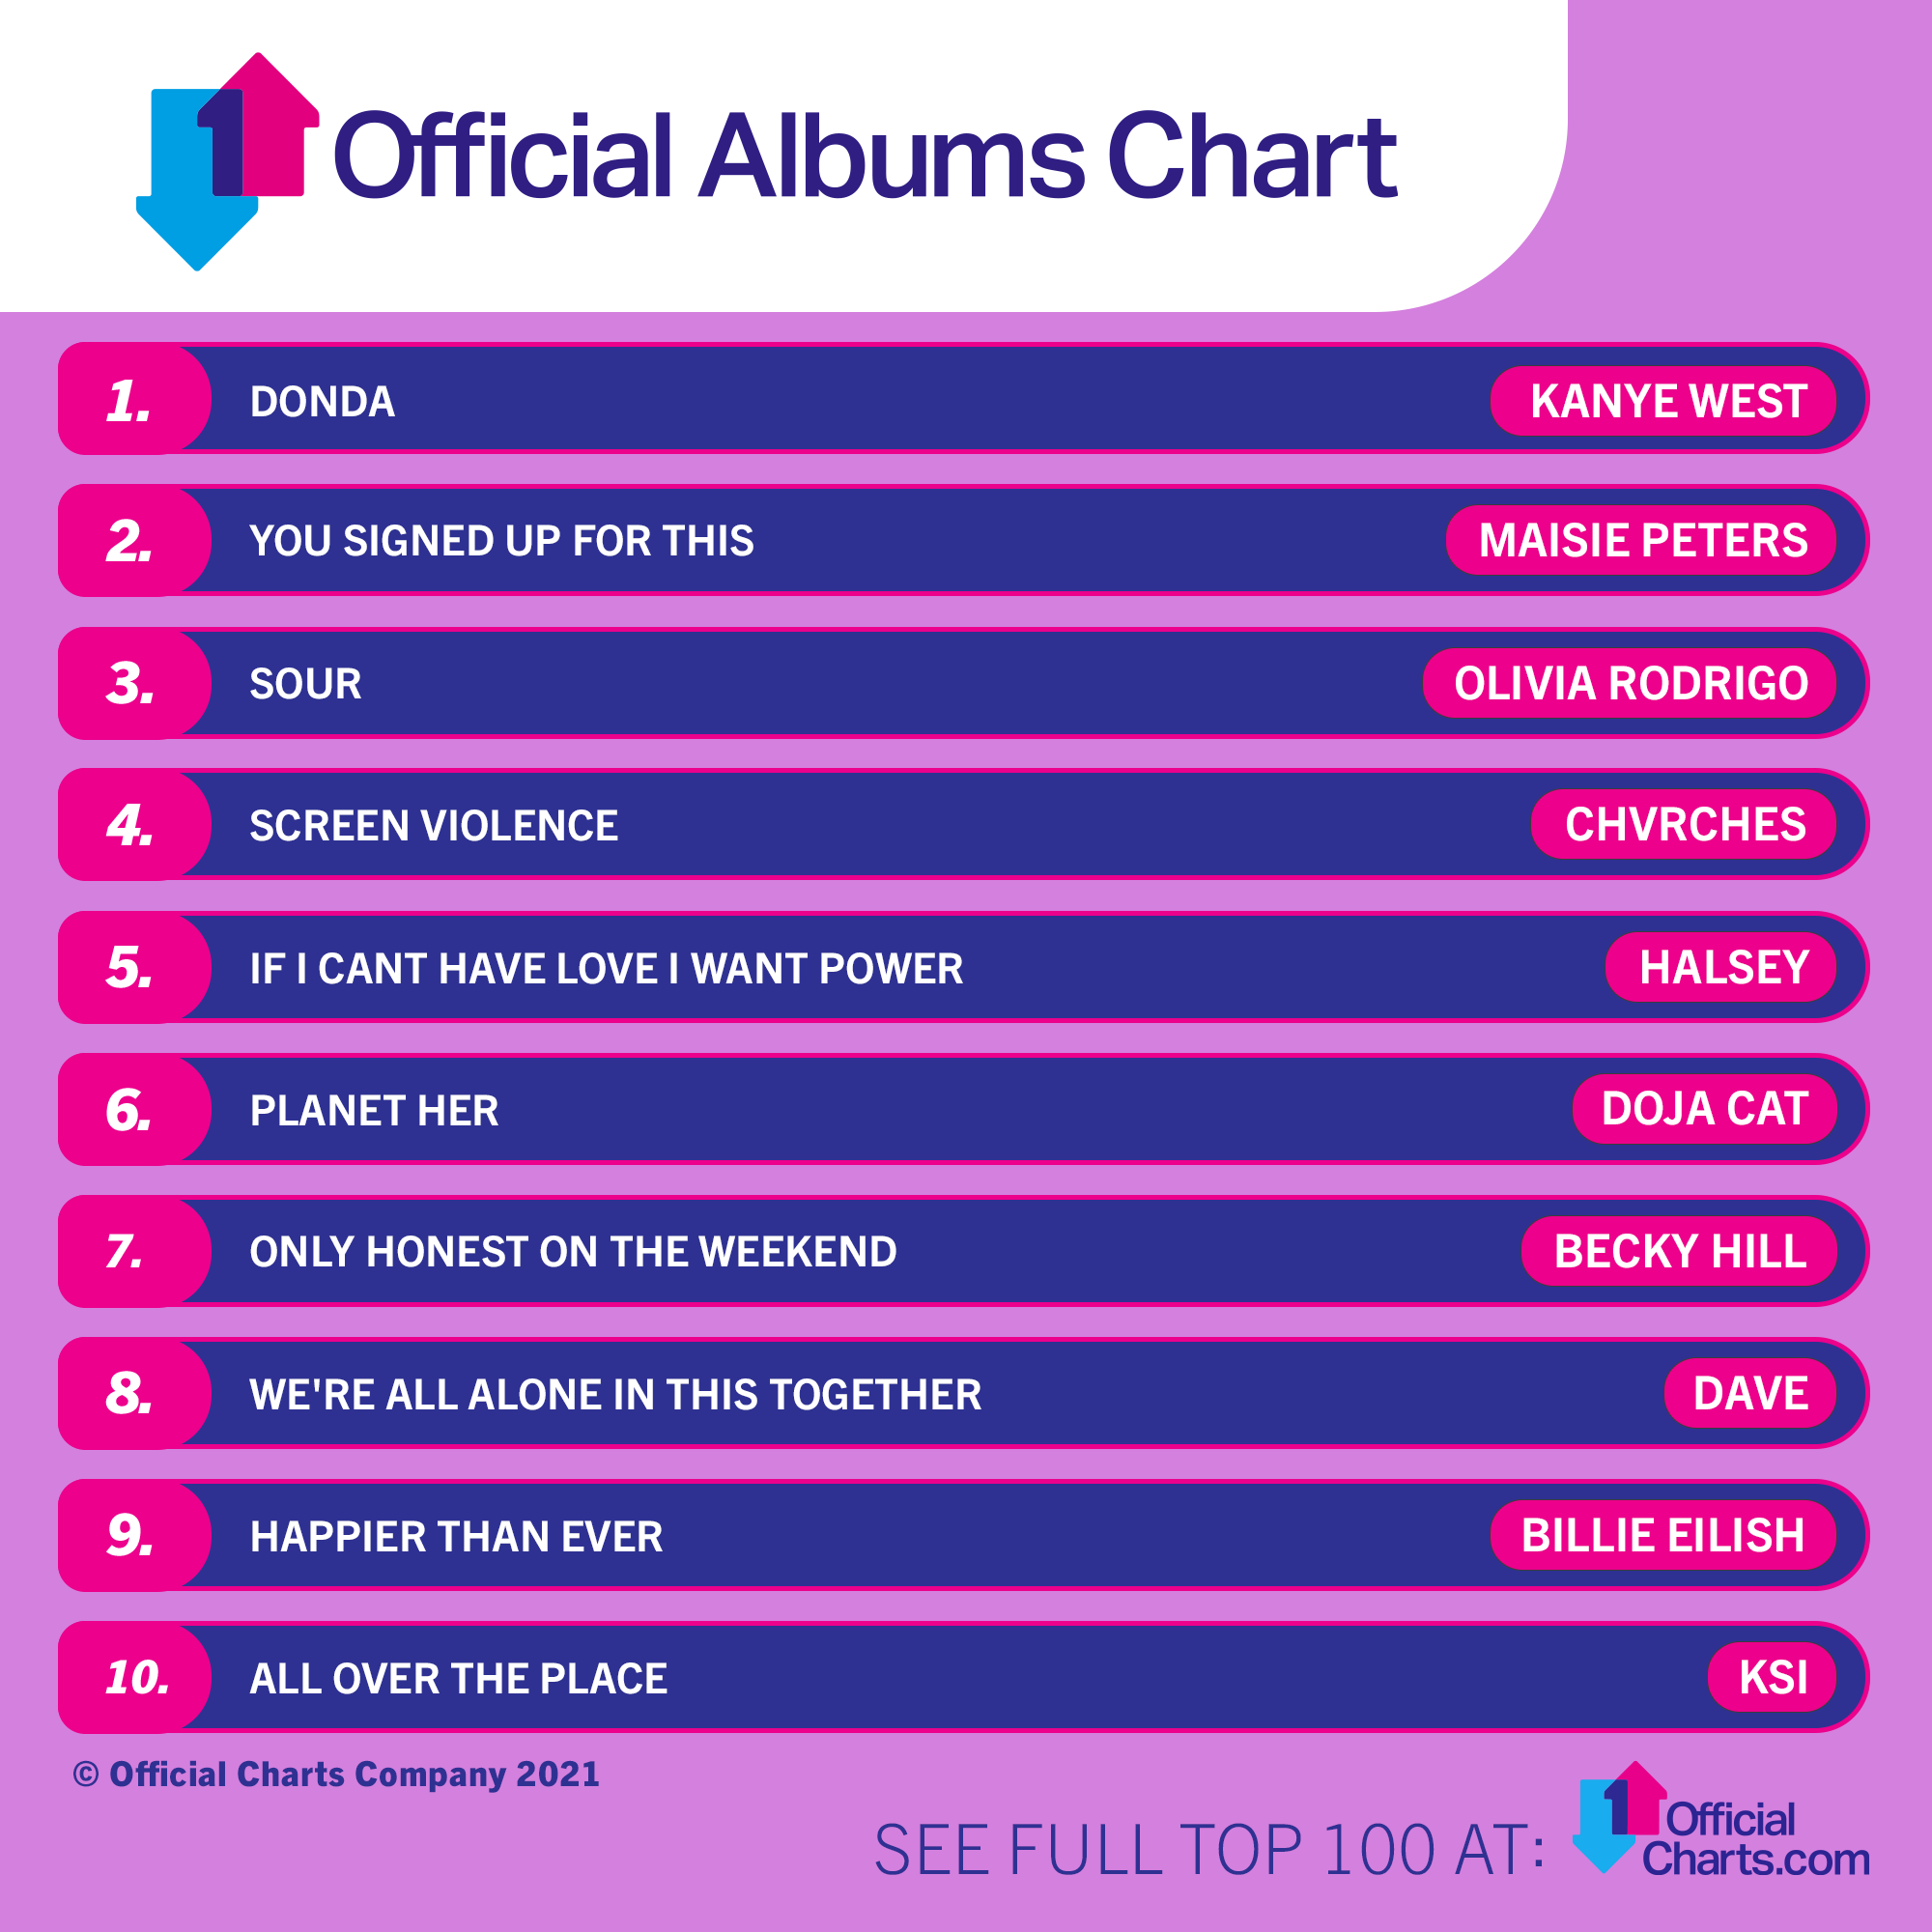 Charts on Twitter: only place you can find Official UK Albums Chart is live! View the Top 10 below, and the full Top 100 here: https://t.co/qA3DHUWWrb https://t.co/620cewBG7c" /